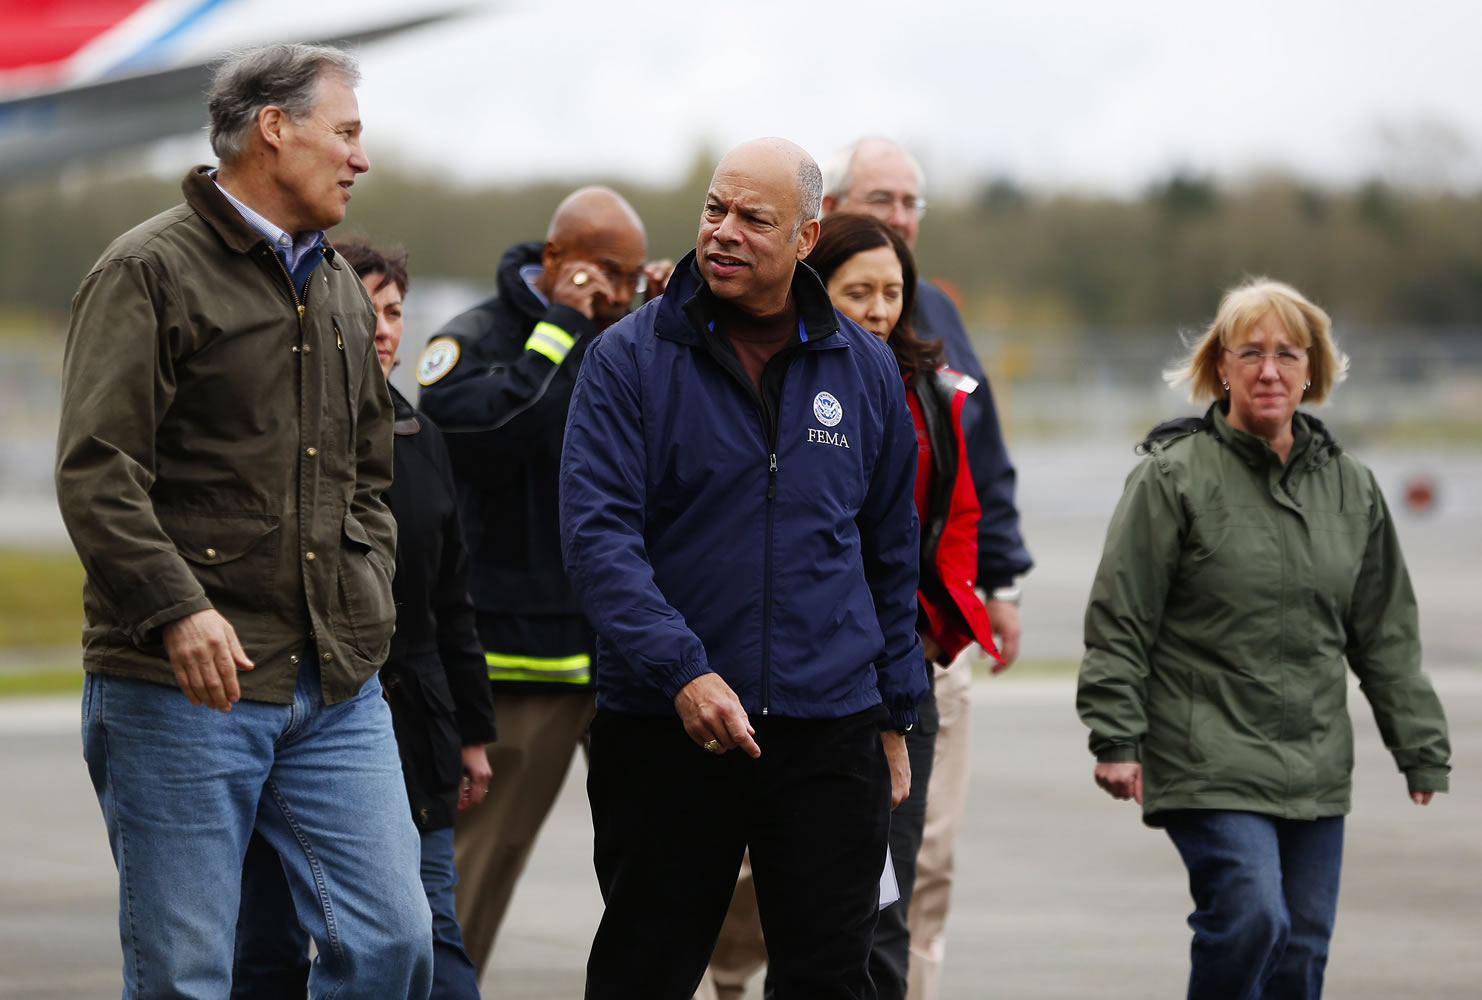 Gov. Jay Inslee, left, speaks with Secretary of Homeland Security Jeh Johnson, center, at Paine Field as they walk to the podium Sunday with officials including Sens. Maria Cantwell, in red, and Patty Murray, in green.